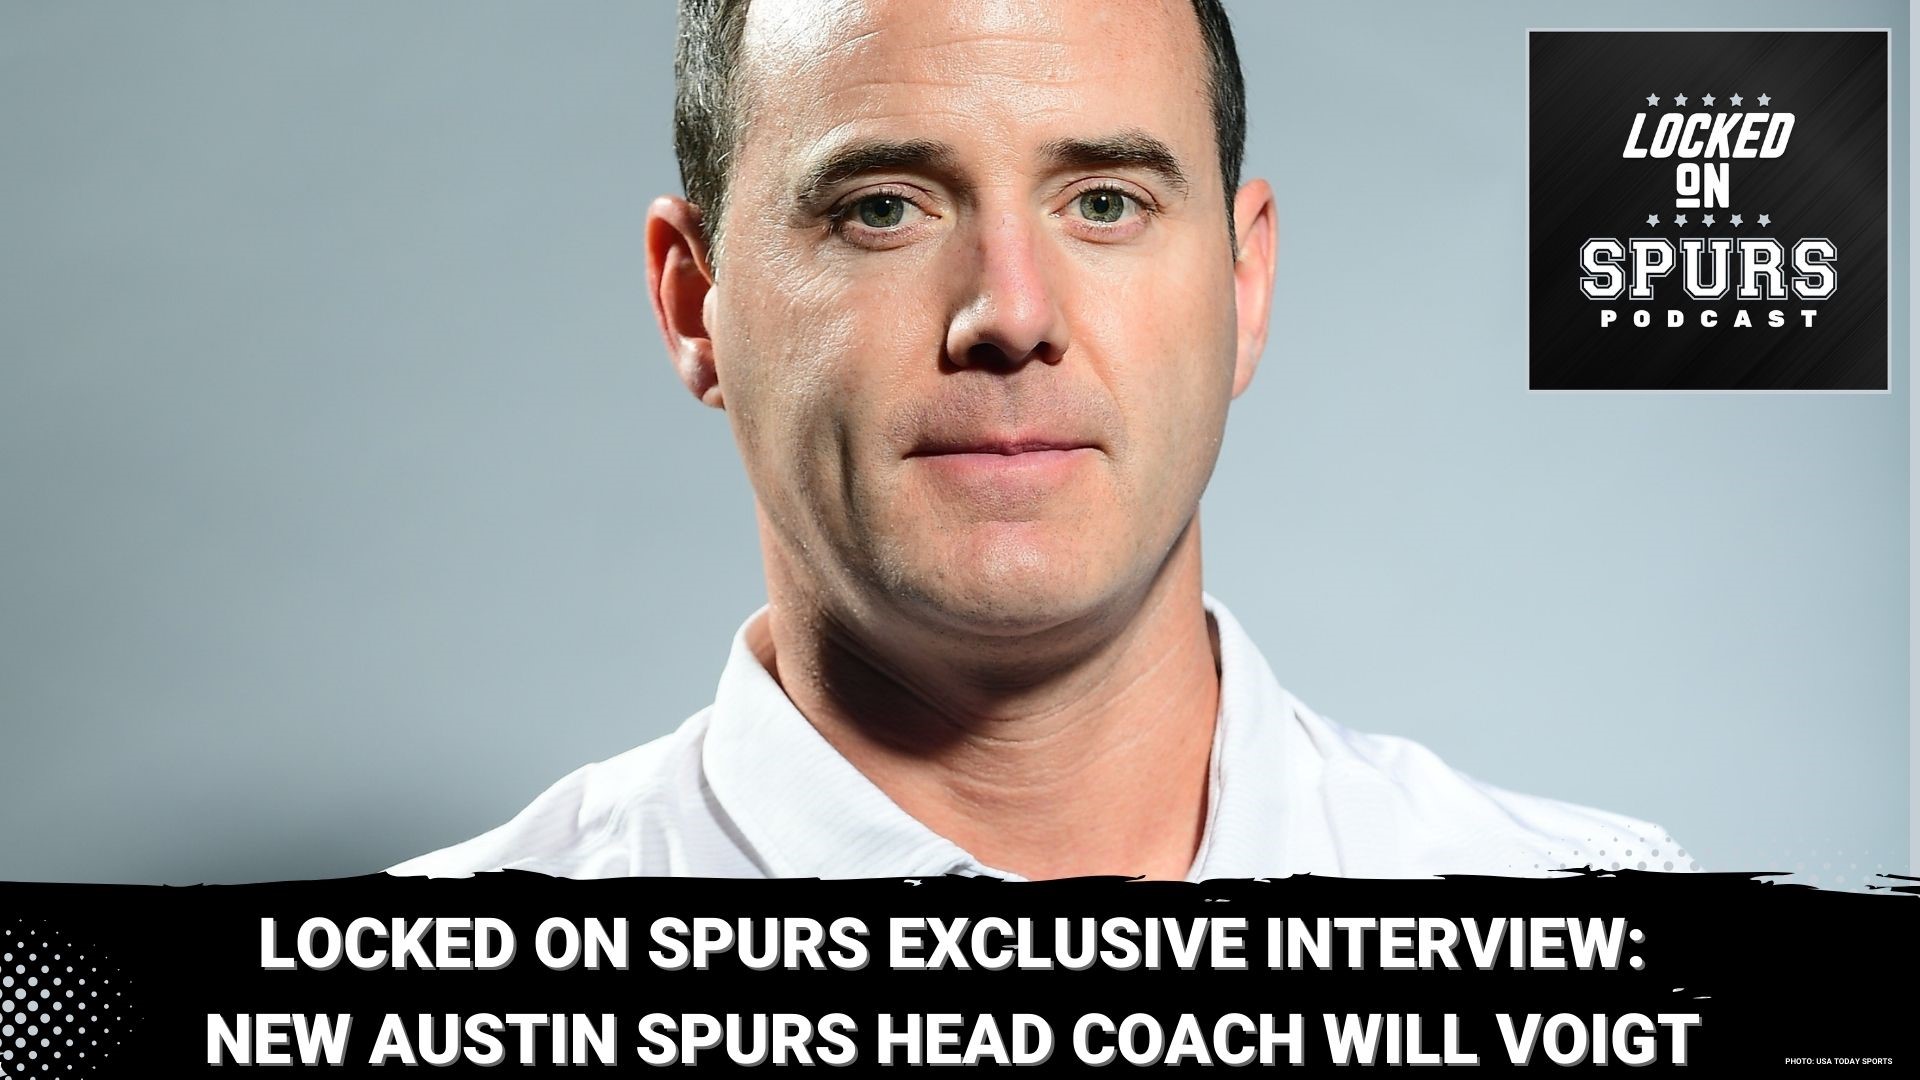 Coach Will Voigt stops by Locked On Spurs to discuss his coaching career, learning from Popovich and more.